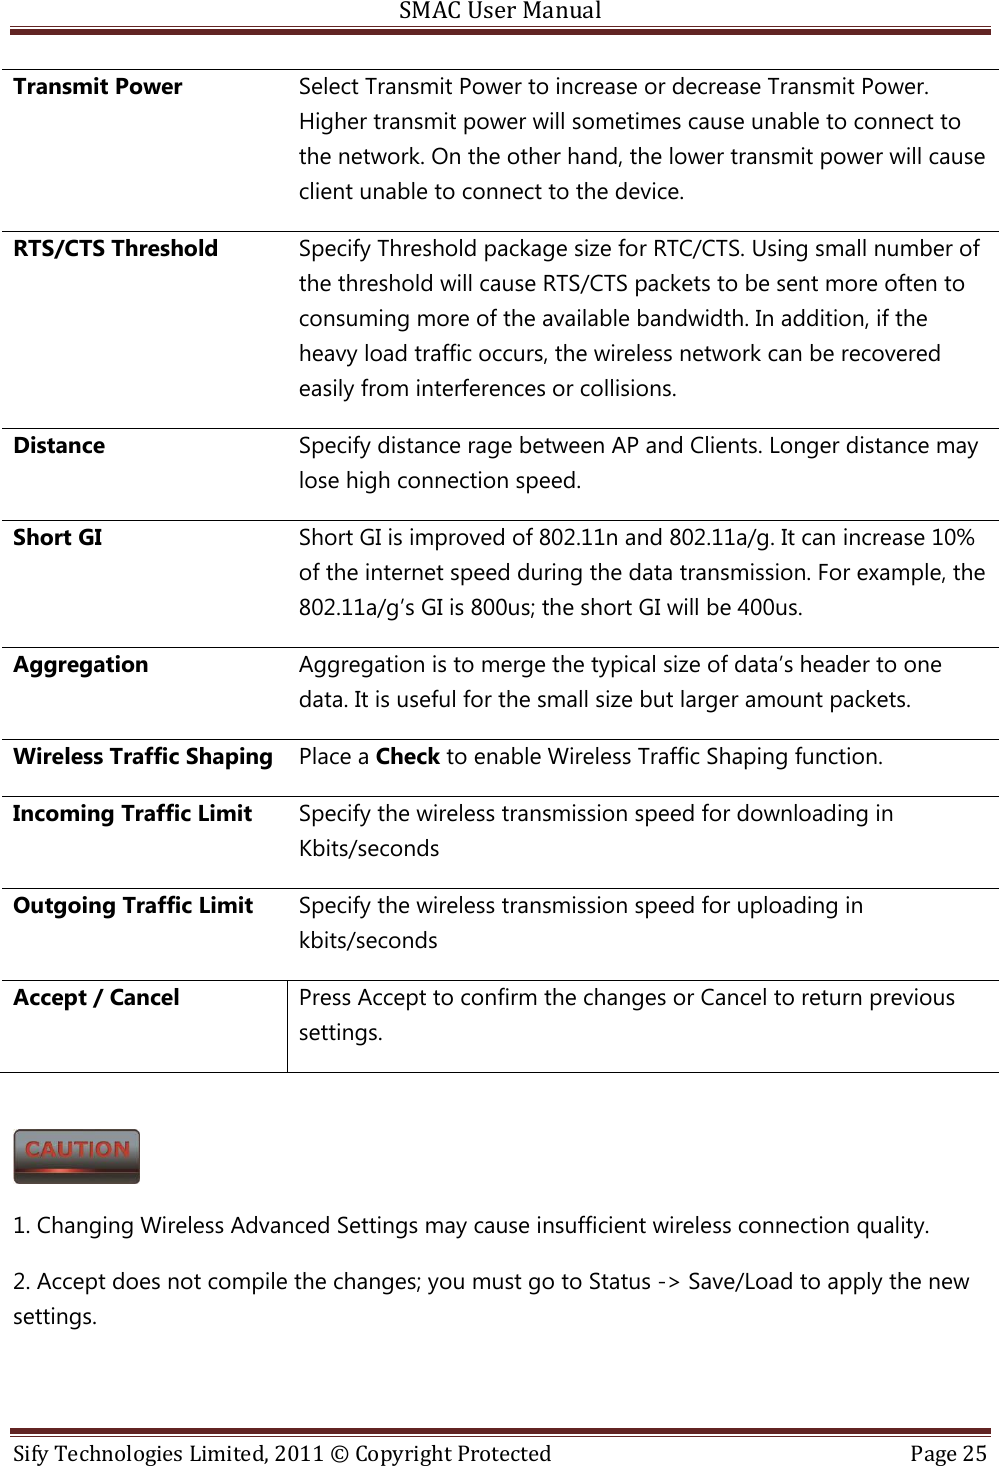 SMAC User Manual  Sify Technologies Limited, 2011 © Copyright Protected  Page 25  Transmit Power Select Transmit Power to increase or decrease Transmit Power. Higher transmit power will sometimes cause unable to connect to the network. On the other hand, the lower transmit power will cause client unable to connect to the device. RTS/CTS Threshold Specify Threshold package size for RTC/CTS. Using small number of the threshold will cause RTS/CTS packets to be sent more often to consuming more of the available bandwidth. In addition, if the heavy load traffic occurs, the wireless network can be recovered easily from interferences or collisions. Distance Specify distance rage between AP and Clients. Longer distance may lose high connection speed. Short GI Short GI is improved of 802.11n and 802.11a/g. It can increase 10% of the internet speed during the data transmission. For example, the 802.11a/g’s GI is 800us; the short GI will be 400us. Aggregation Aggregation is to merge the typical size of data’s header to one data. It is useful for the small size but larger amount packets. Wireless Traffic Shaping Place a Check to enable Wireless Traffic Shaping function. Incoming Traffic Limit Specify the wireless transmission speed for downloading in Kbits/seconds Outgoing Traffic Limit Specify the wireless transmission speed for uploading in kbits/seconds Accept / Cancel Press Accept to confirm the changes or Cancel to return previous settings.    1. Changing Wireless Advanced Settings may cause insufficient wireless connection quality.  2. Accept does not compile the changes; you must go to Status -&gt; Save/Load to apply the new settings.   